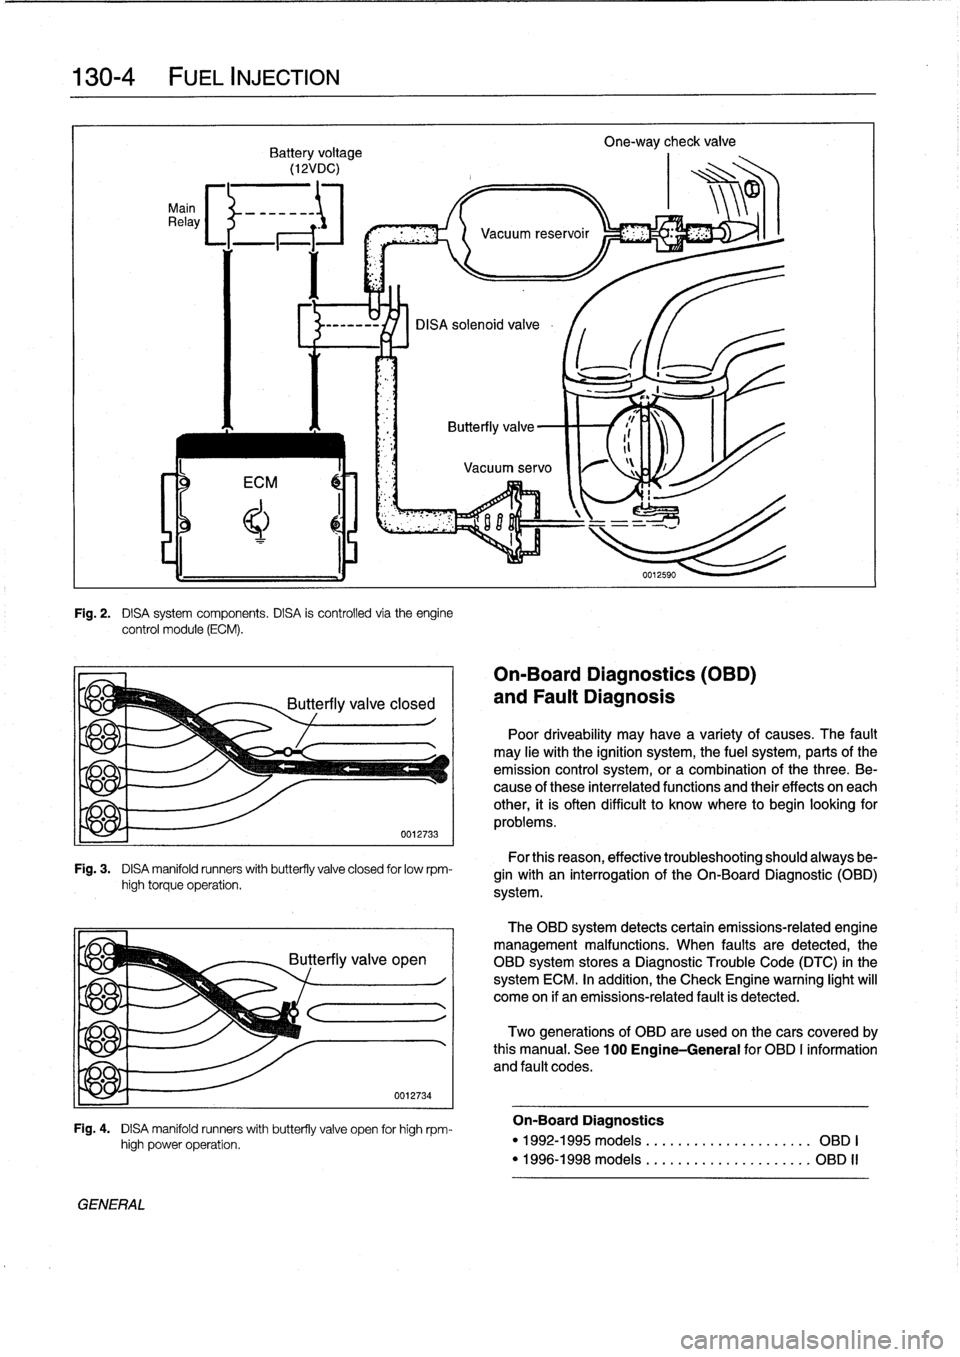 BMW 325i 1994 E36 Repair Manual 
130-
4

	

FUEL
INJECTION

Main
Relay

Fig
.
2
.

	

DISA
system
components
.
DISA
is
controlled
via
theengine
control
module
(ECM)
.

Fig
.
3
.

	

DISA
manifold
runners
with
butterfly
valve
closed
